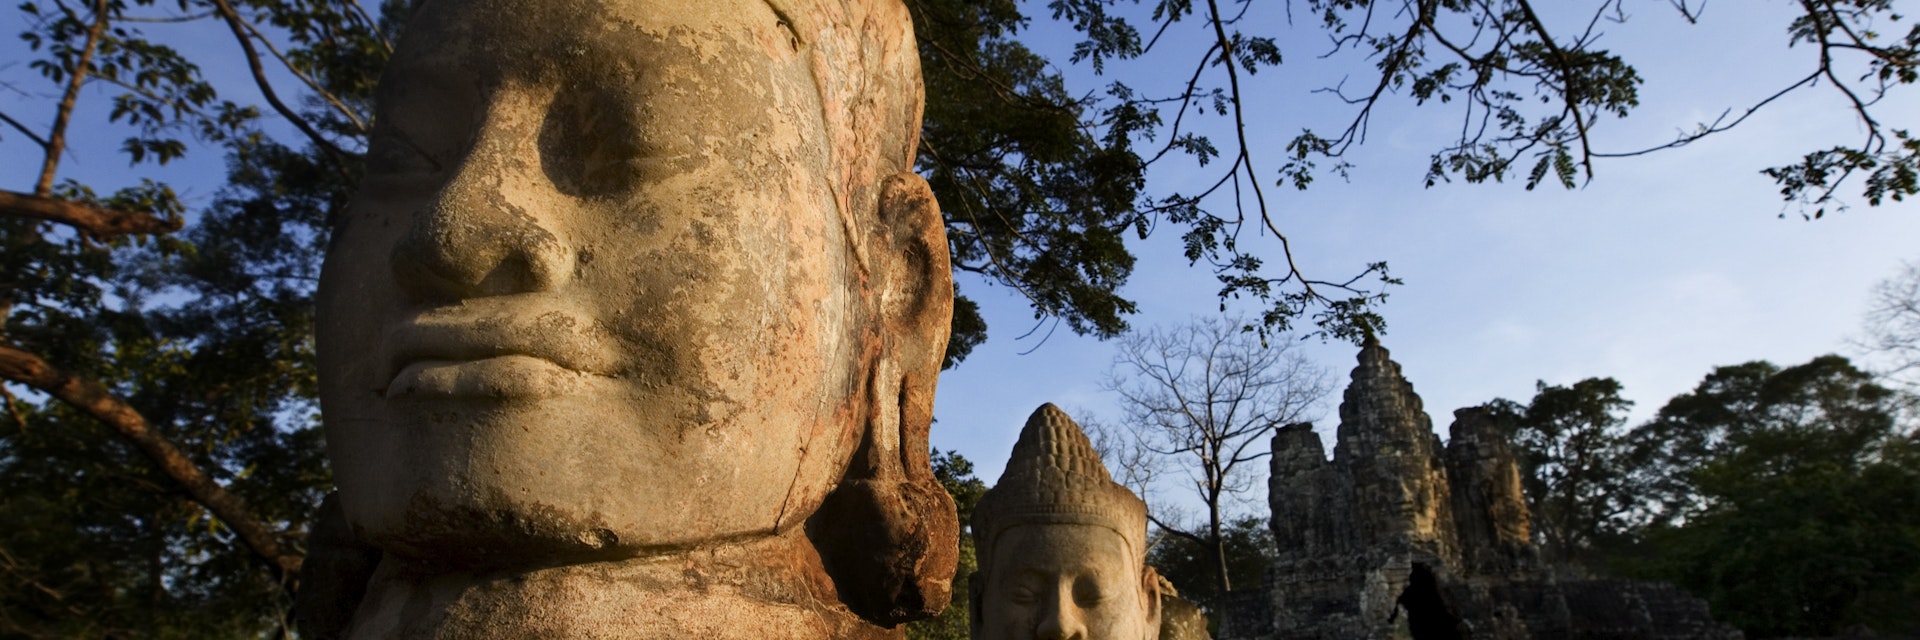 Large head sculpture at South Gate of Angkor Thom.